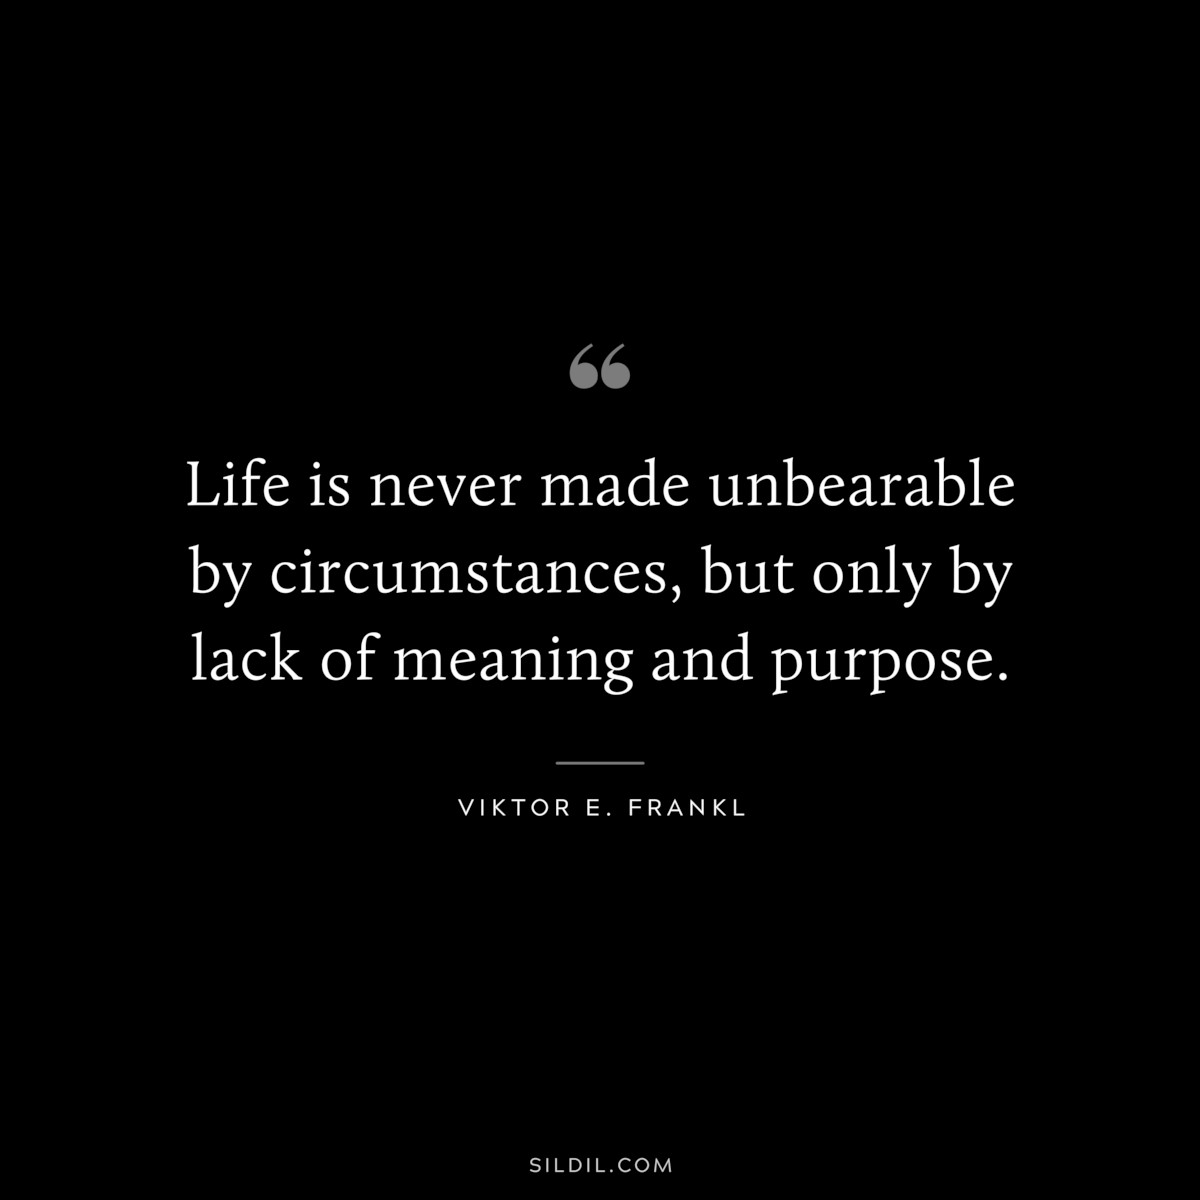 Life is never made unbearable by circumstances, but only by lack of meaning and purpose. ― Viktor E. Frankl